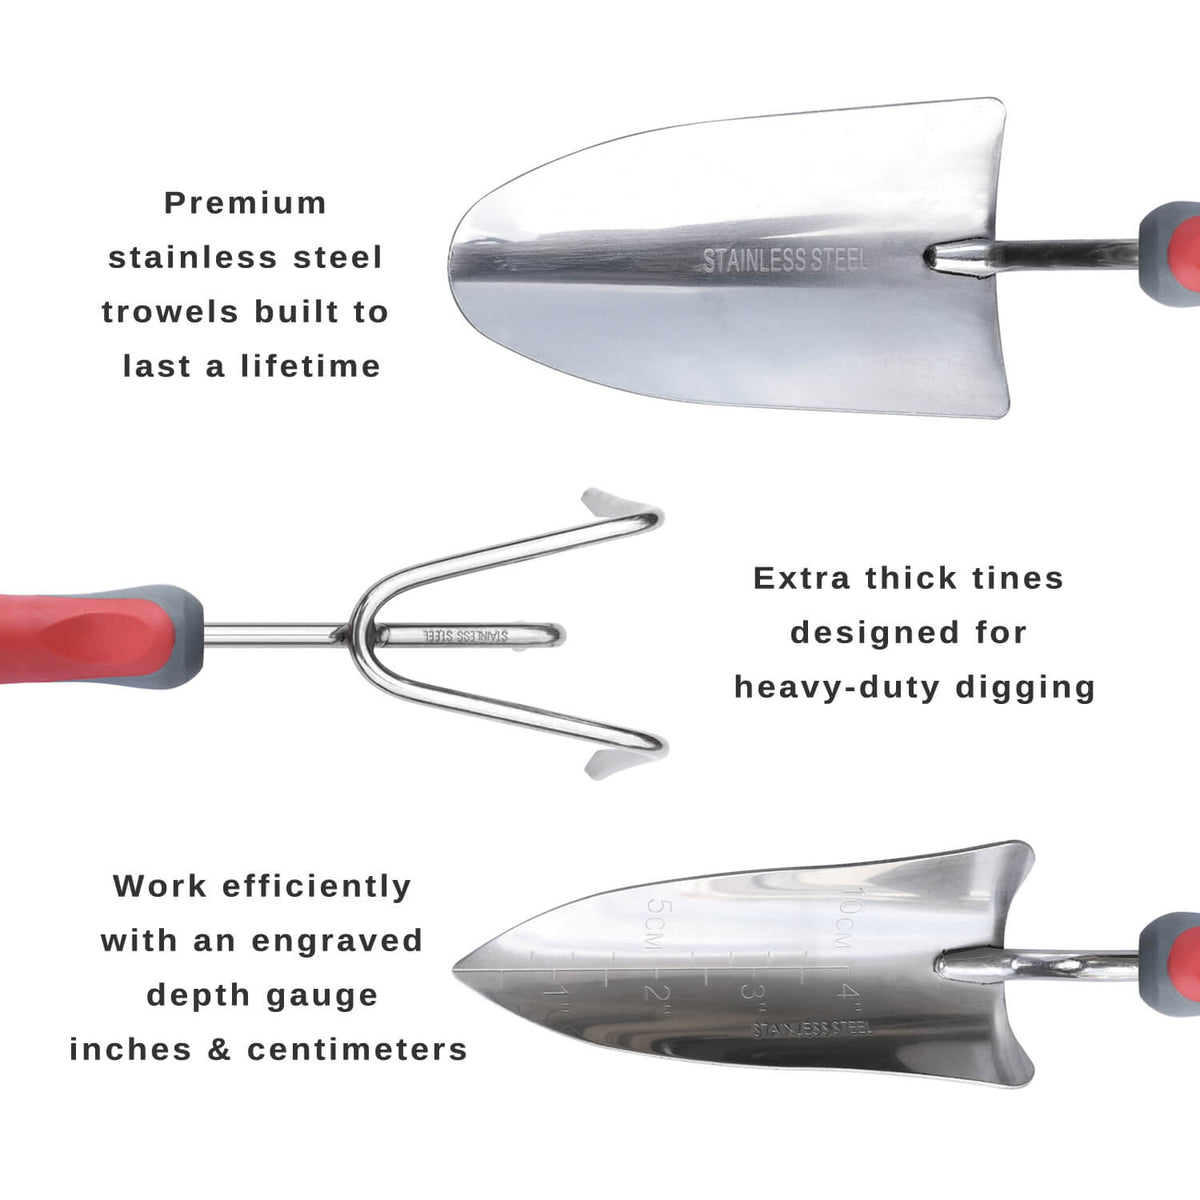 heavy duty stainless steel cultivator, trowel, and transplanter